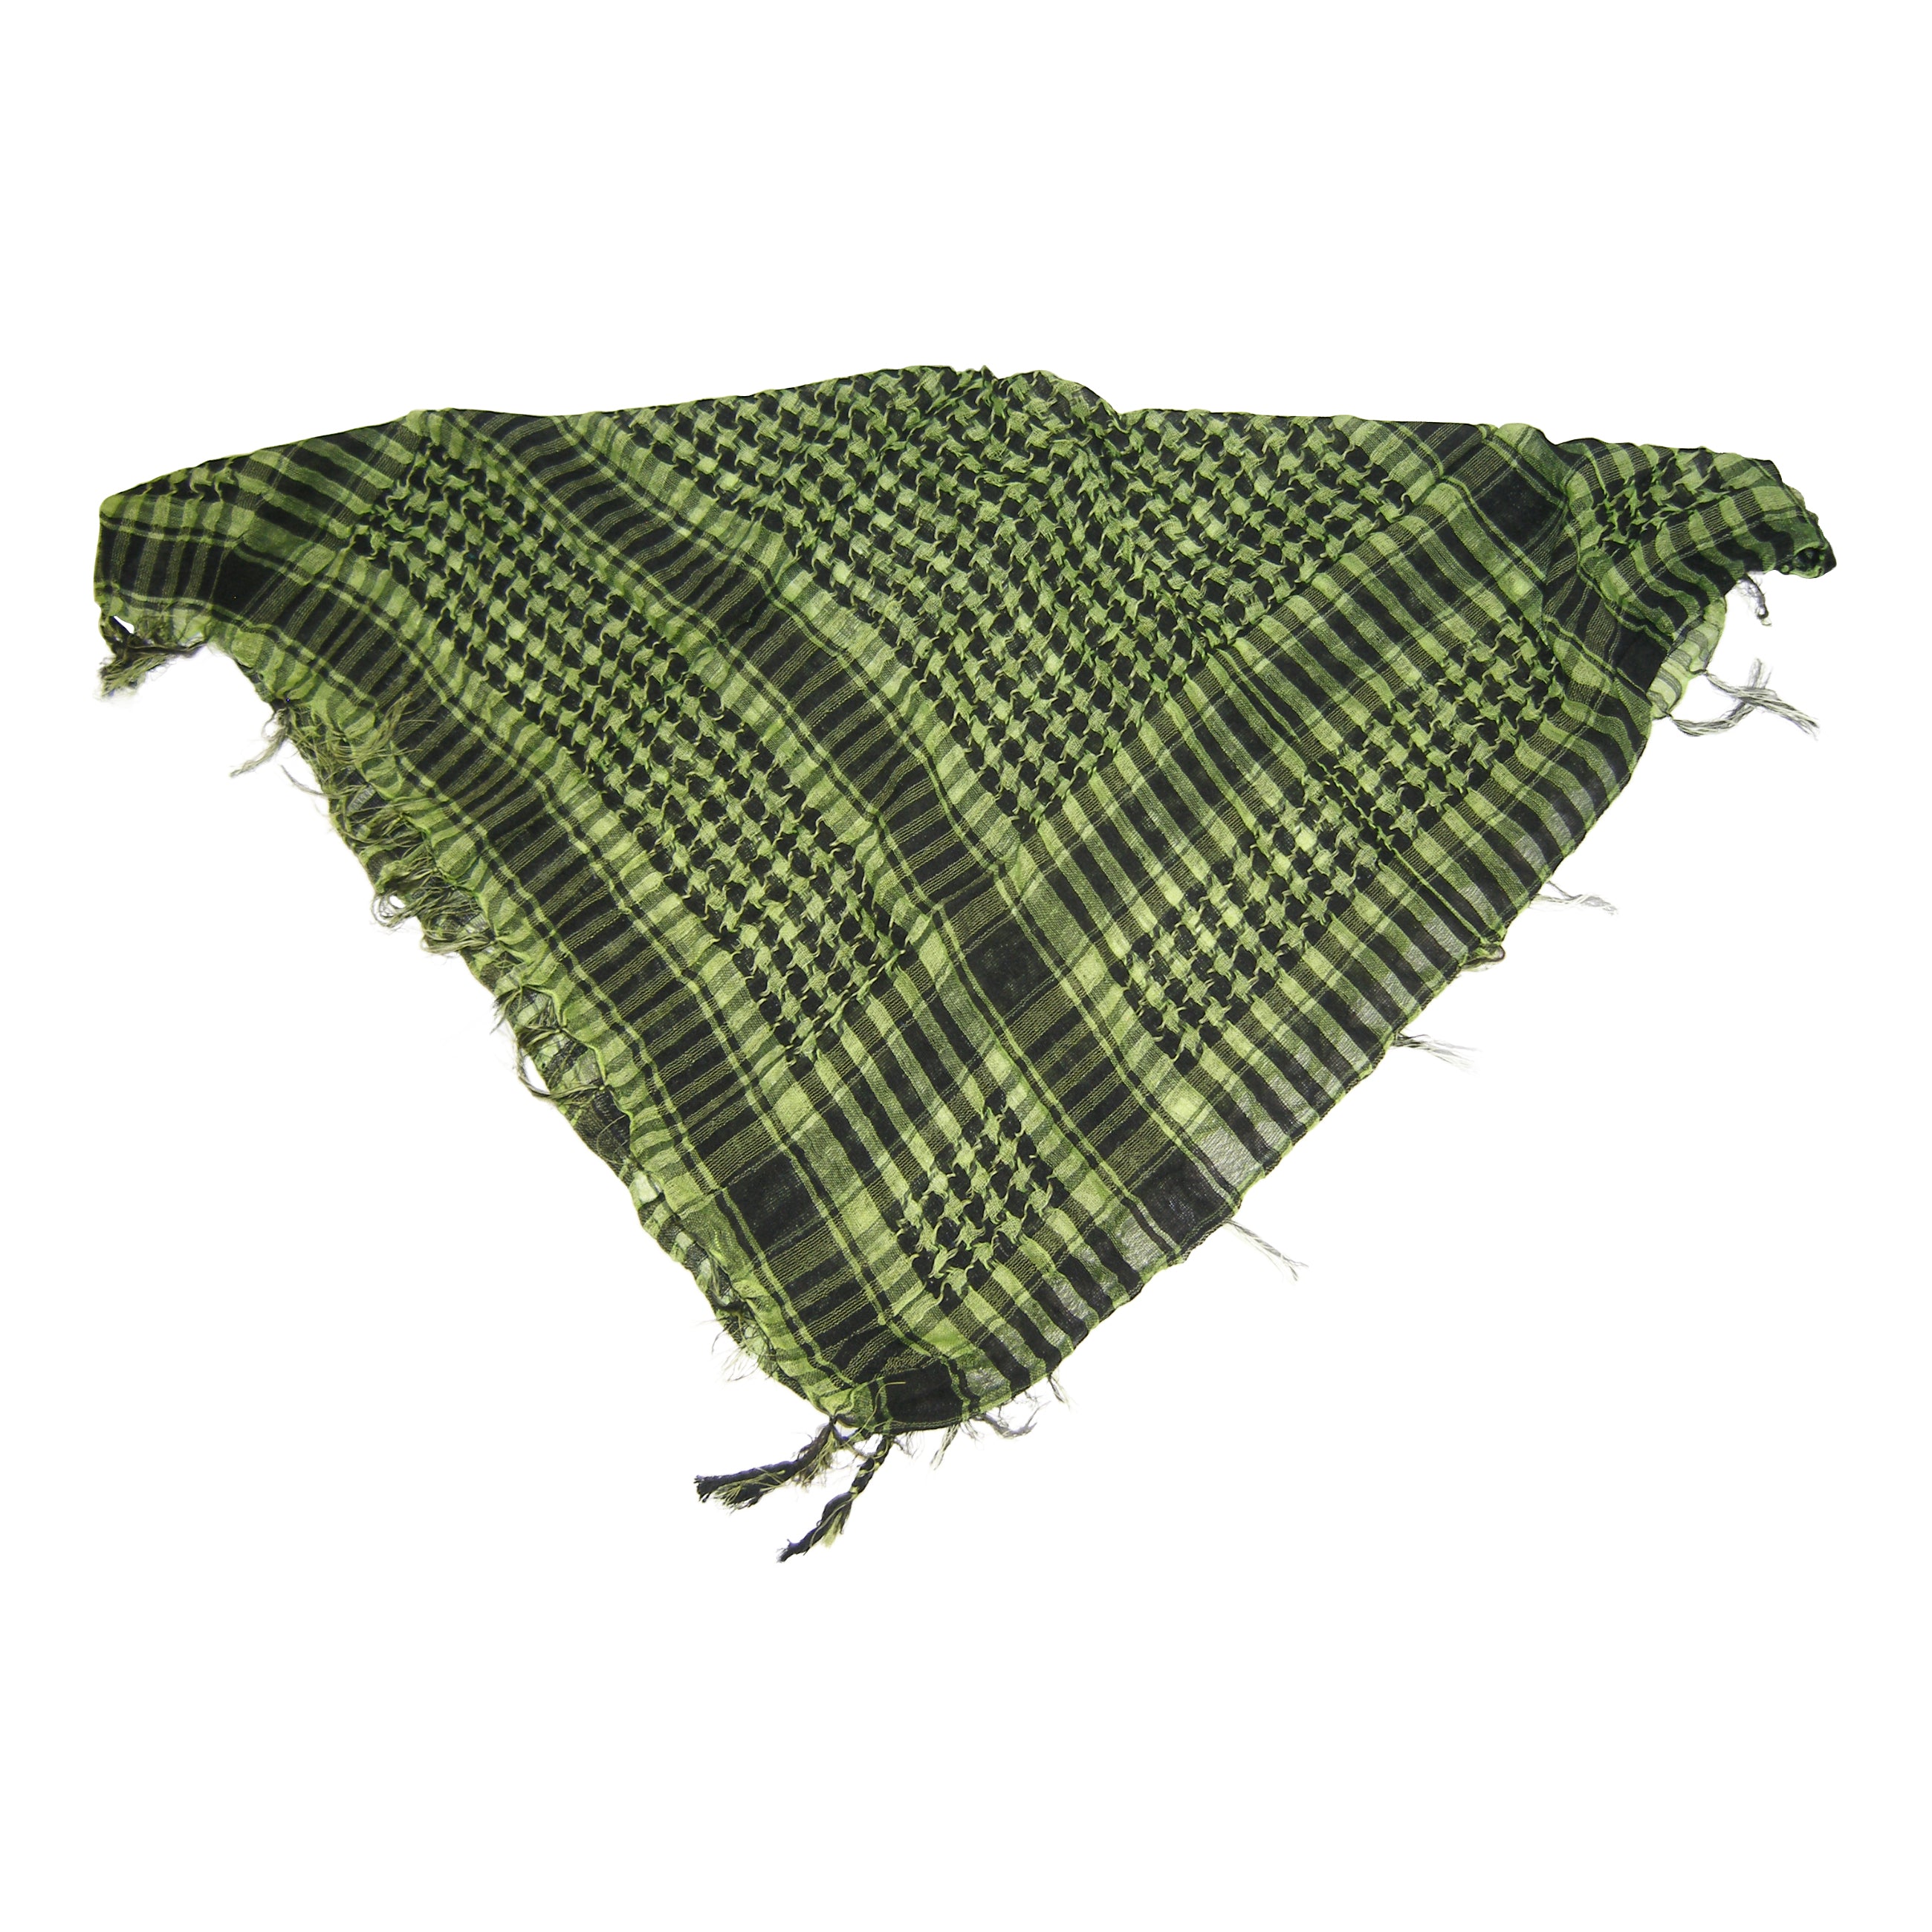 Spec Ops Shemagh Keffiyeh Tactical Scarf Headwrap GREEN